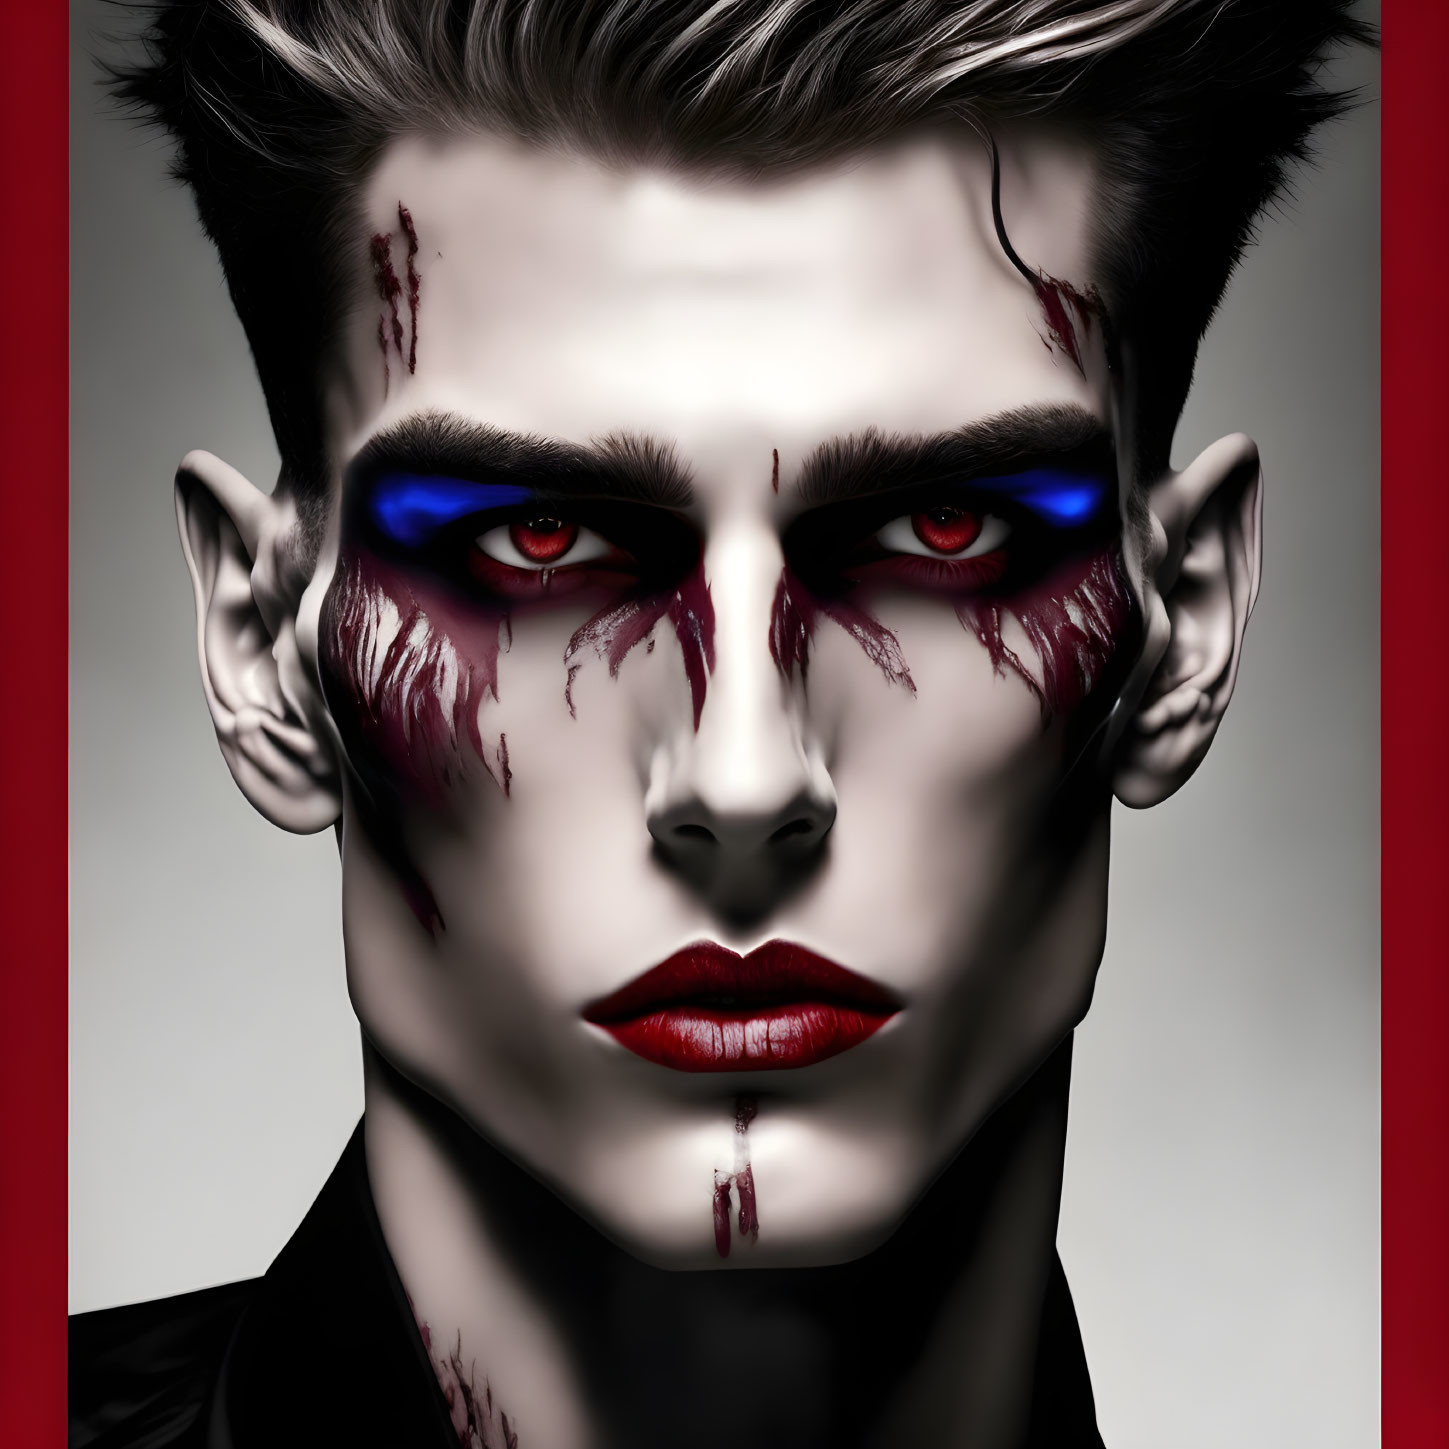 Portrait of person with pale skin, dramatic makeup in vampire-like, gothic style